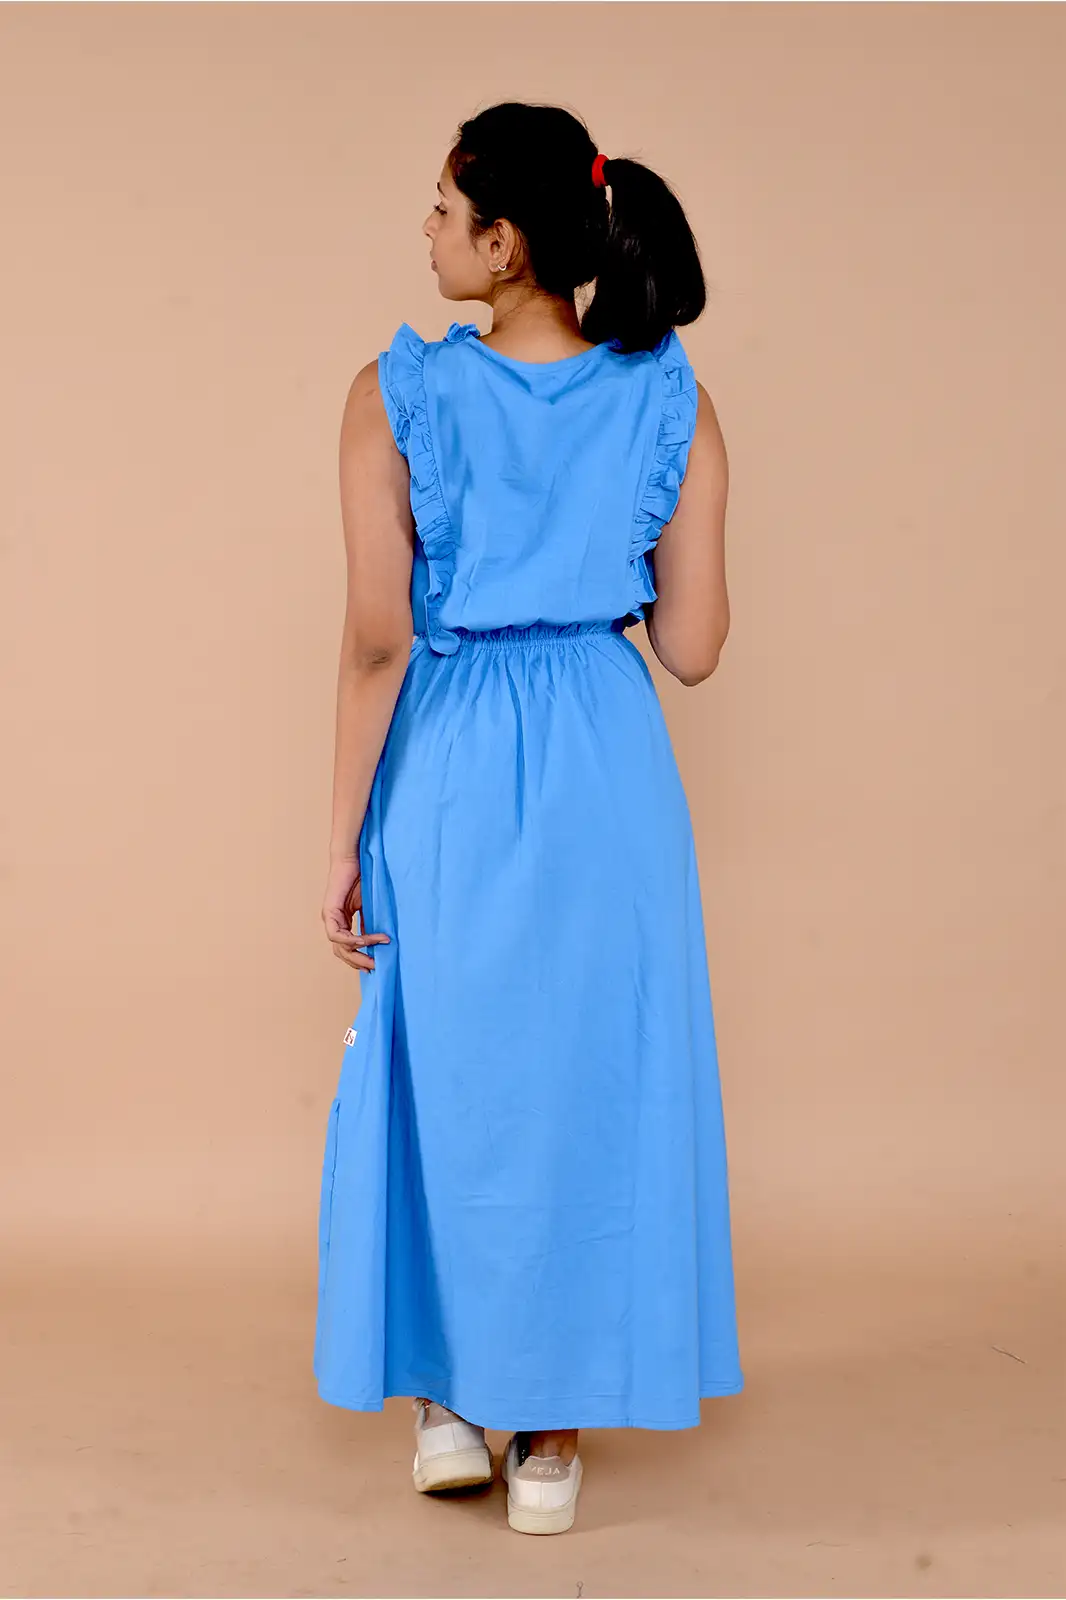 blue full length dress with frill detail, full length dress without sleeves party wear dress women, western dress, women clothing, organic clothing